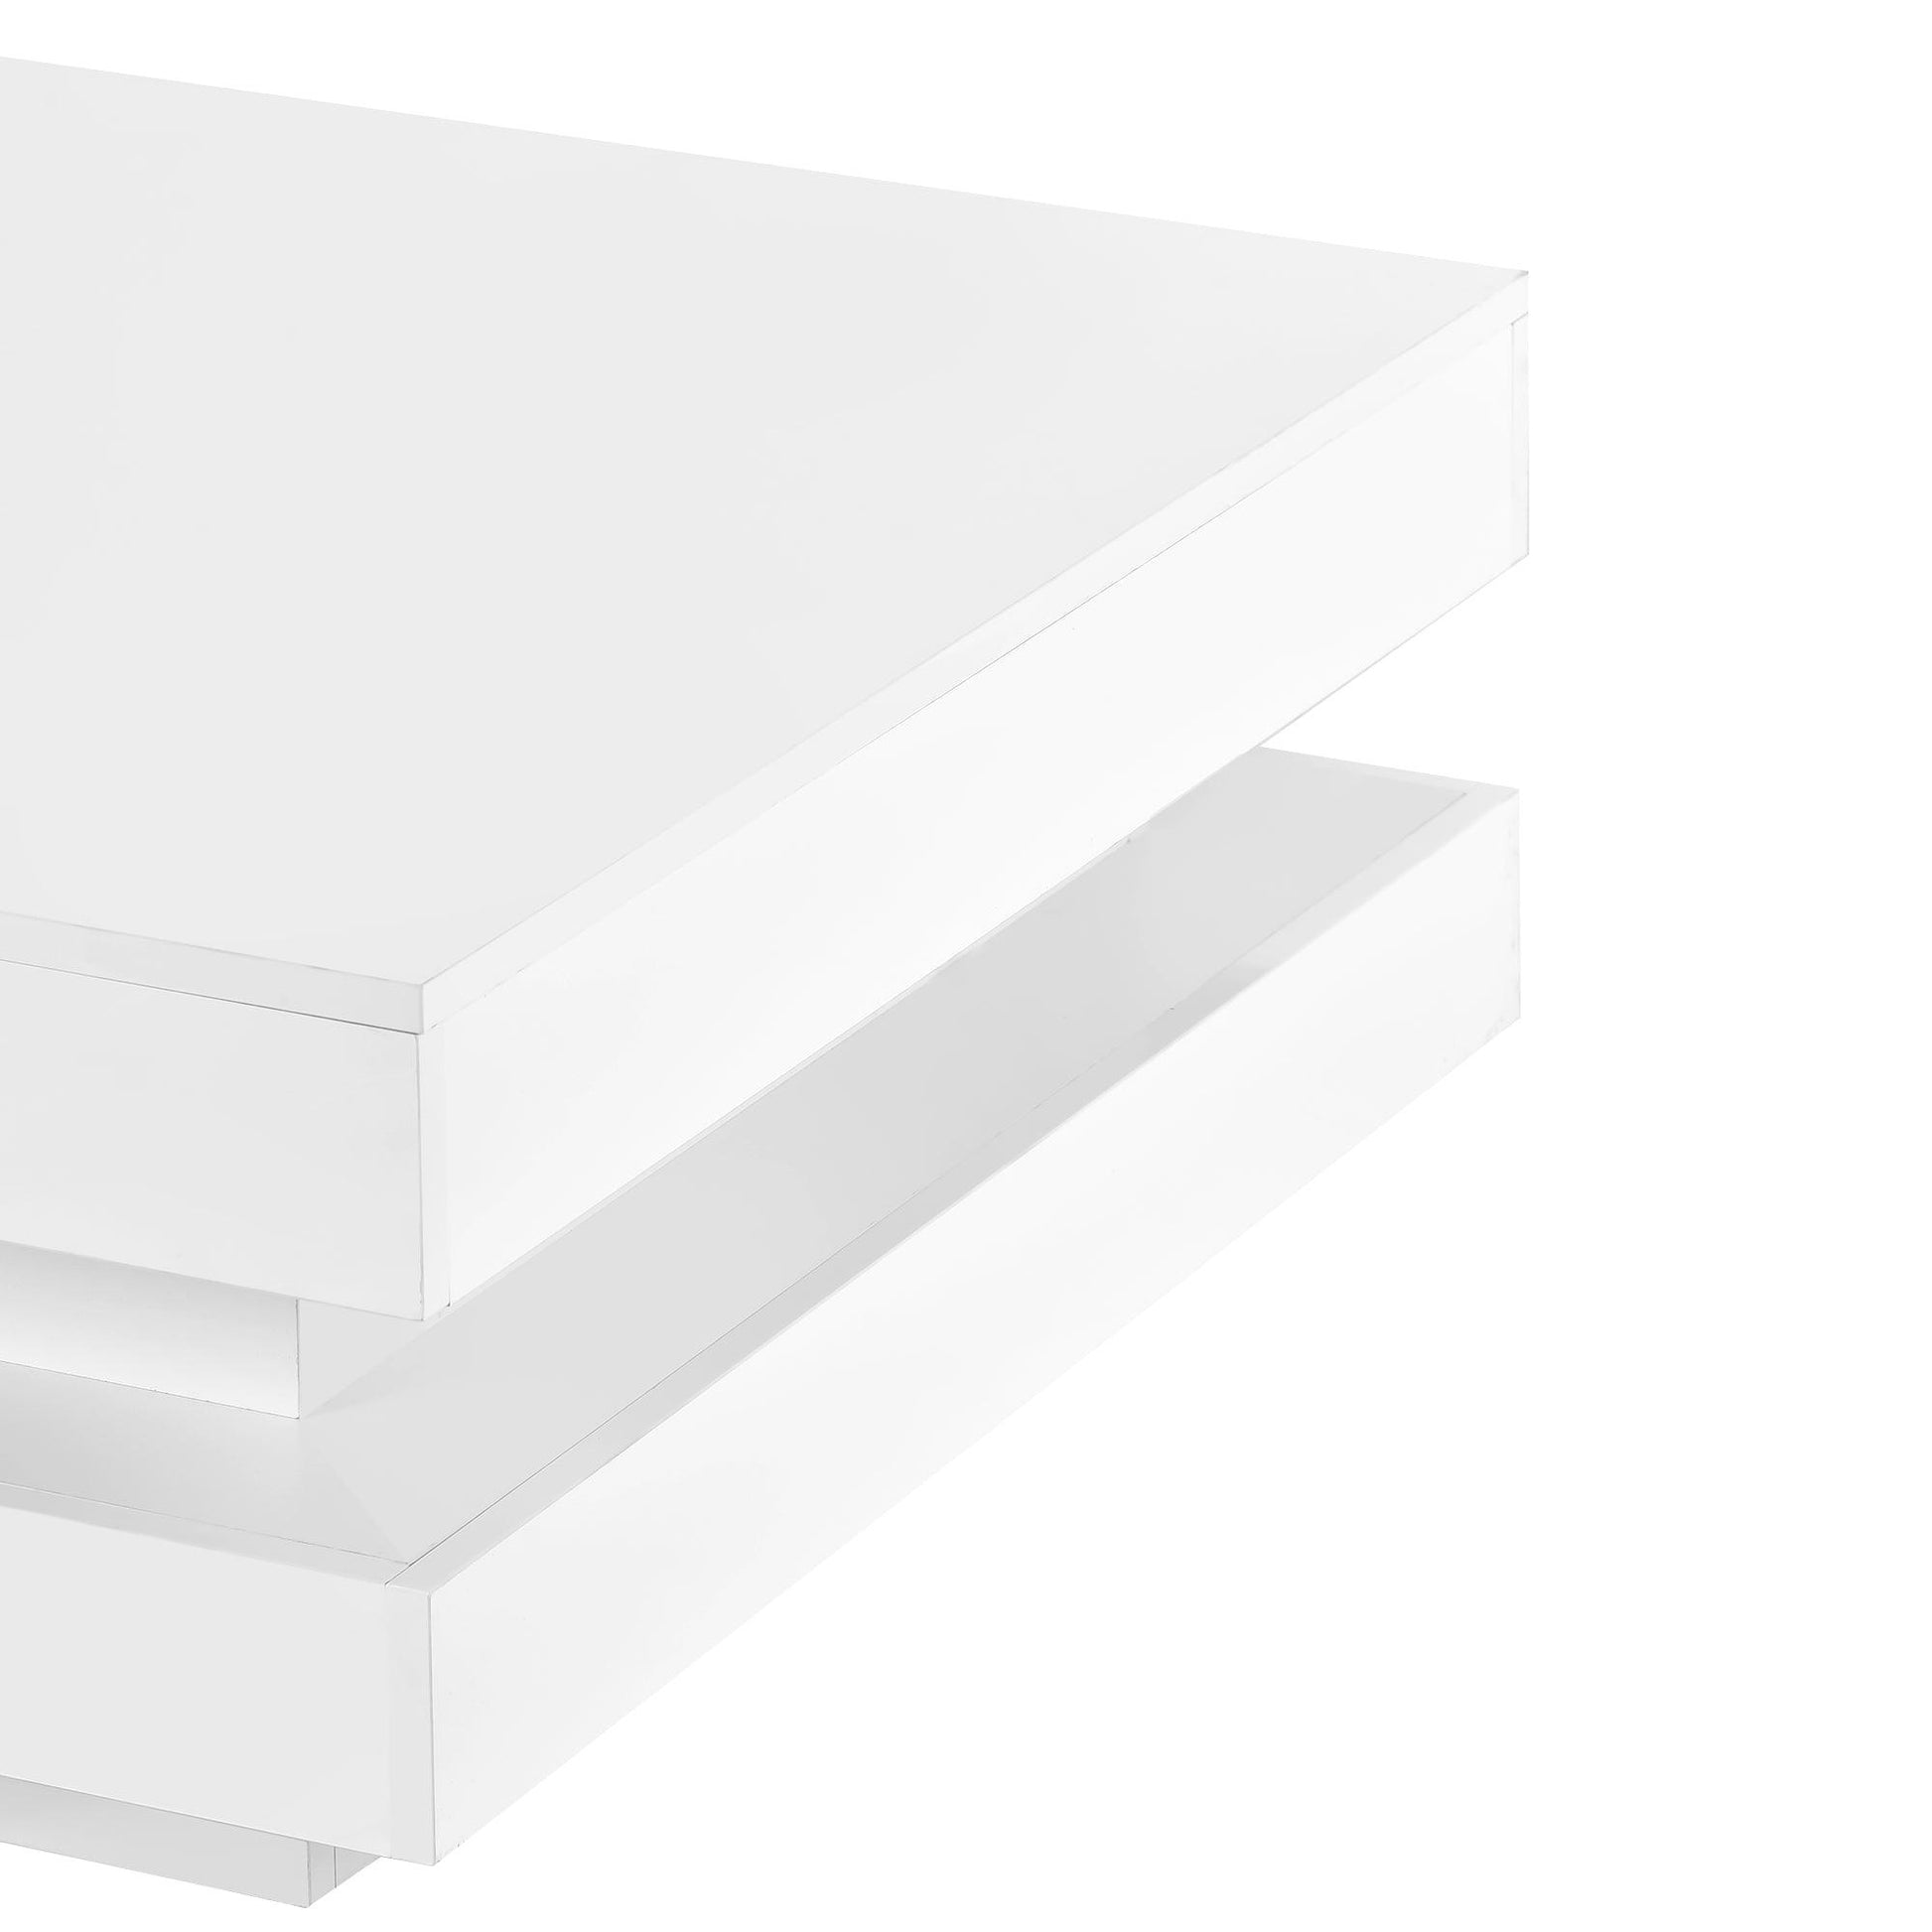 ON-TREND High Gloss Minimalist Design with LED Lights 2-Tier Square Coffee Table White - FurniFindUSA